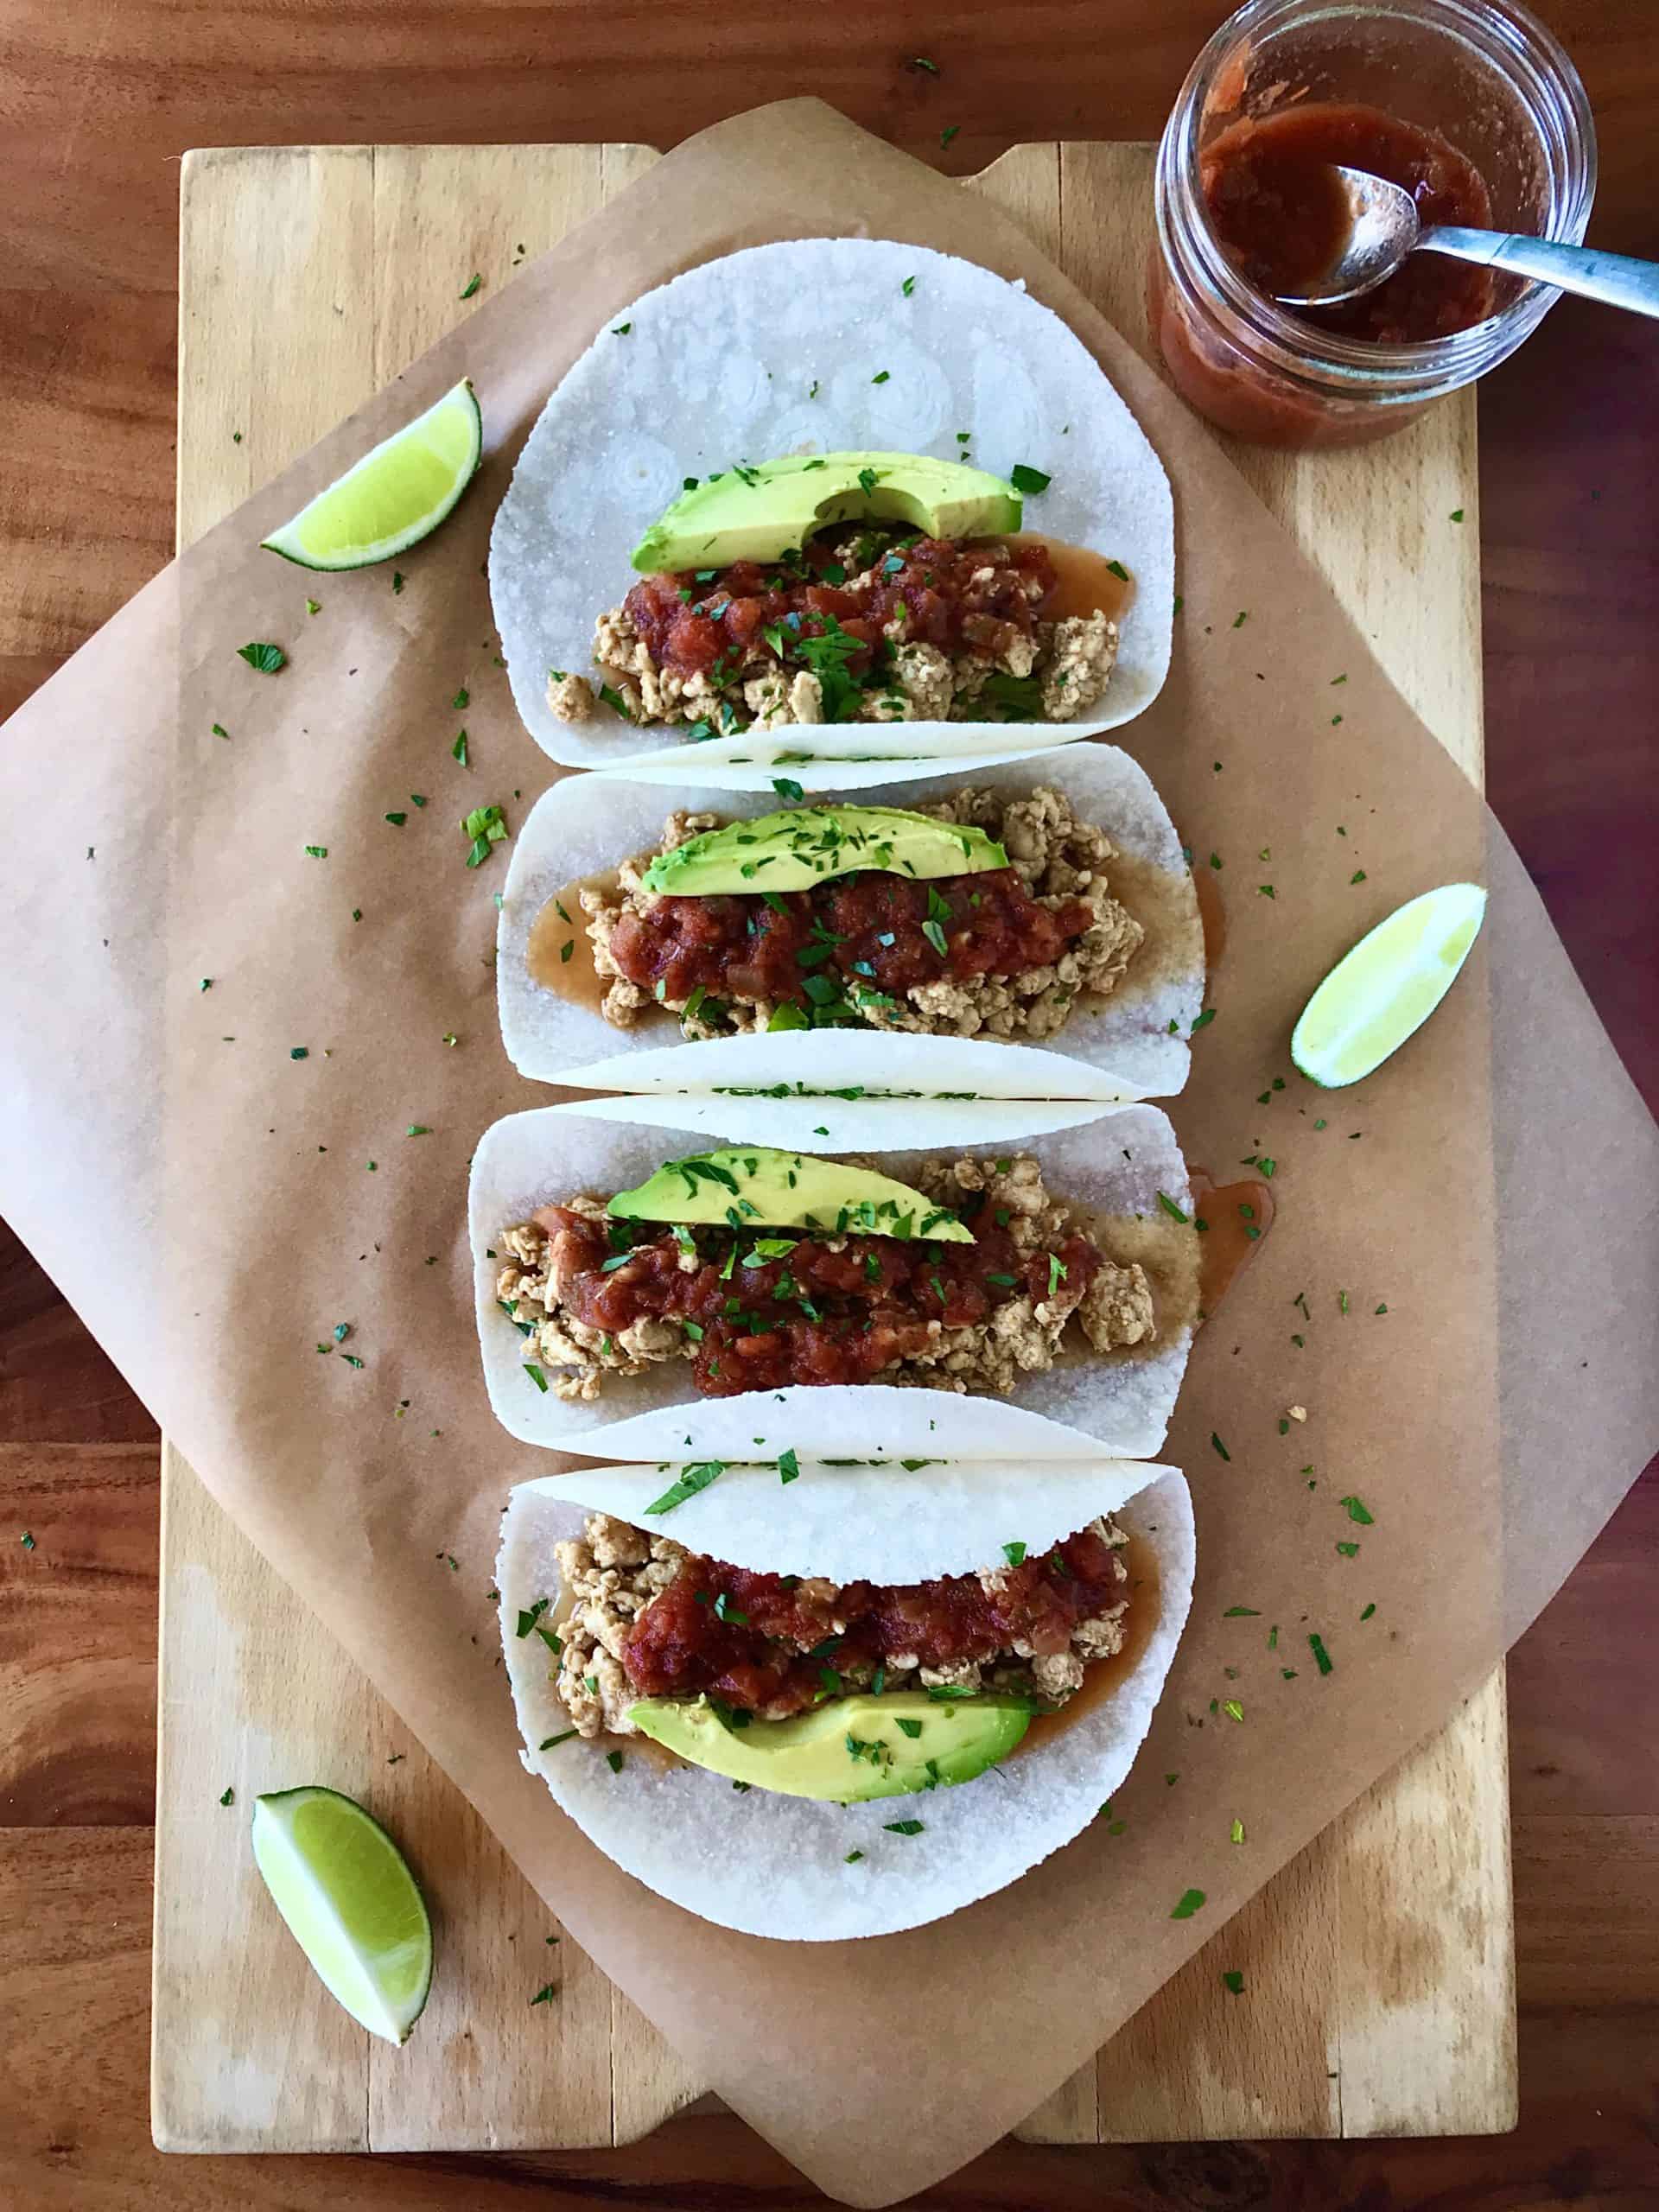 ground chicken, salsa and avocado slices in tortillas on a wooden board on a wooden table